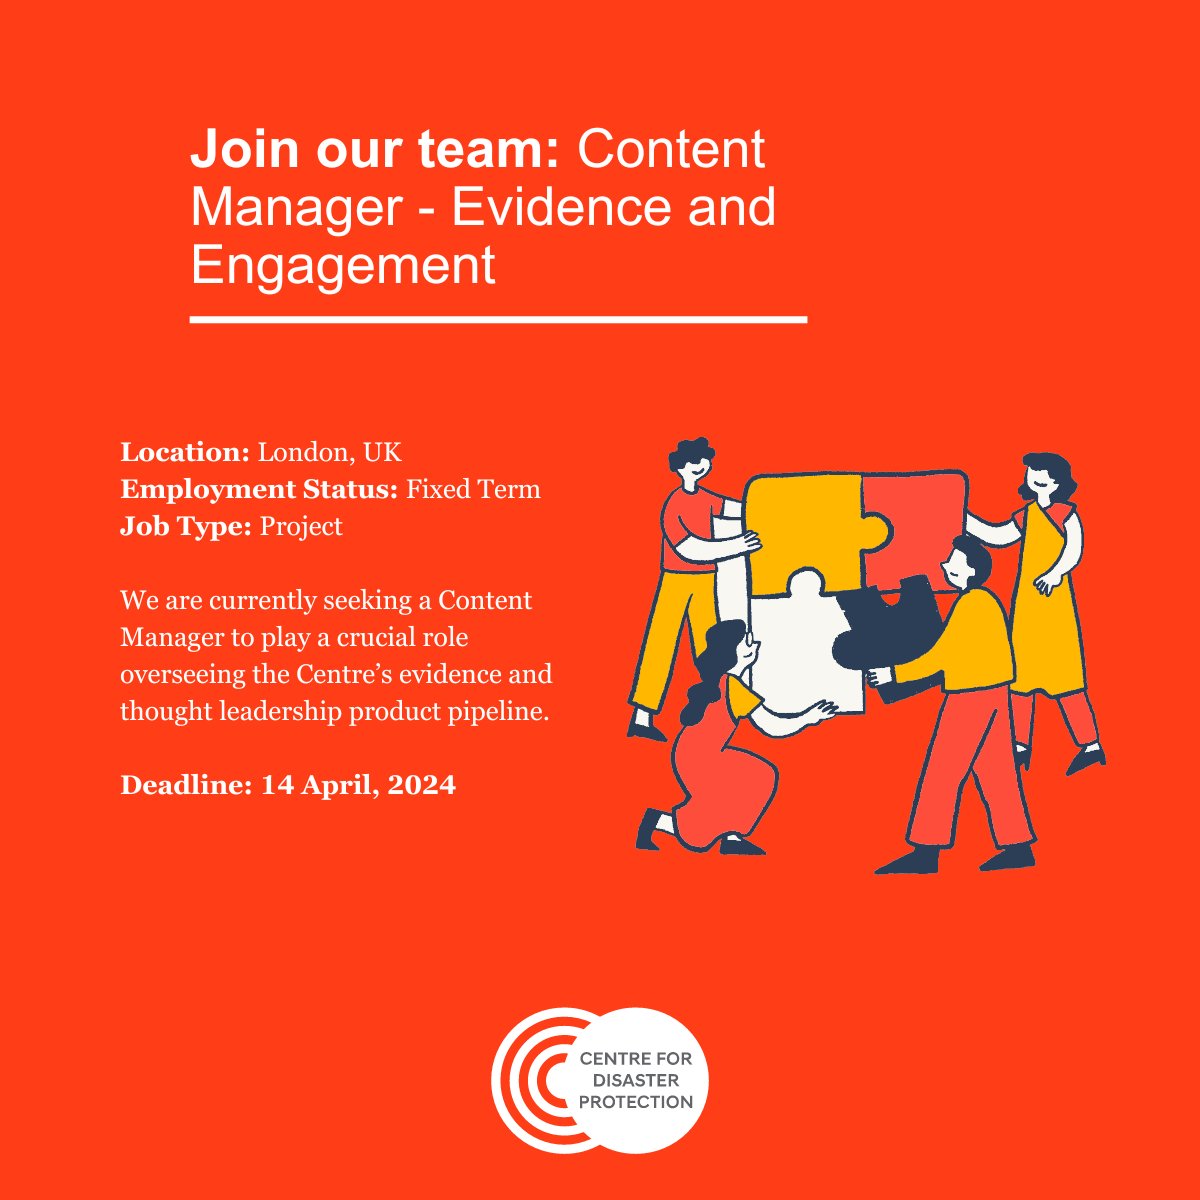 Join the @CentreforDP team: We are currently seeking a Content Manager to play a crucial role in overseeing the Centre’s evidence and thought leadership product pipeline: disasterprotection.org/join-us #WeAreHiring #ContentManager #Marketing #ThoughtLeadership #Recruitment